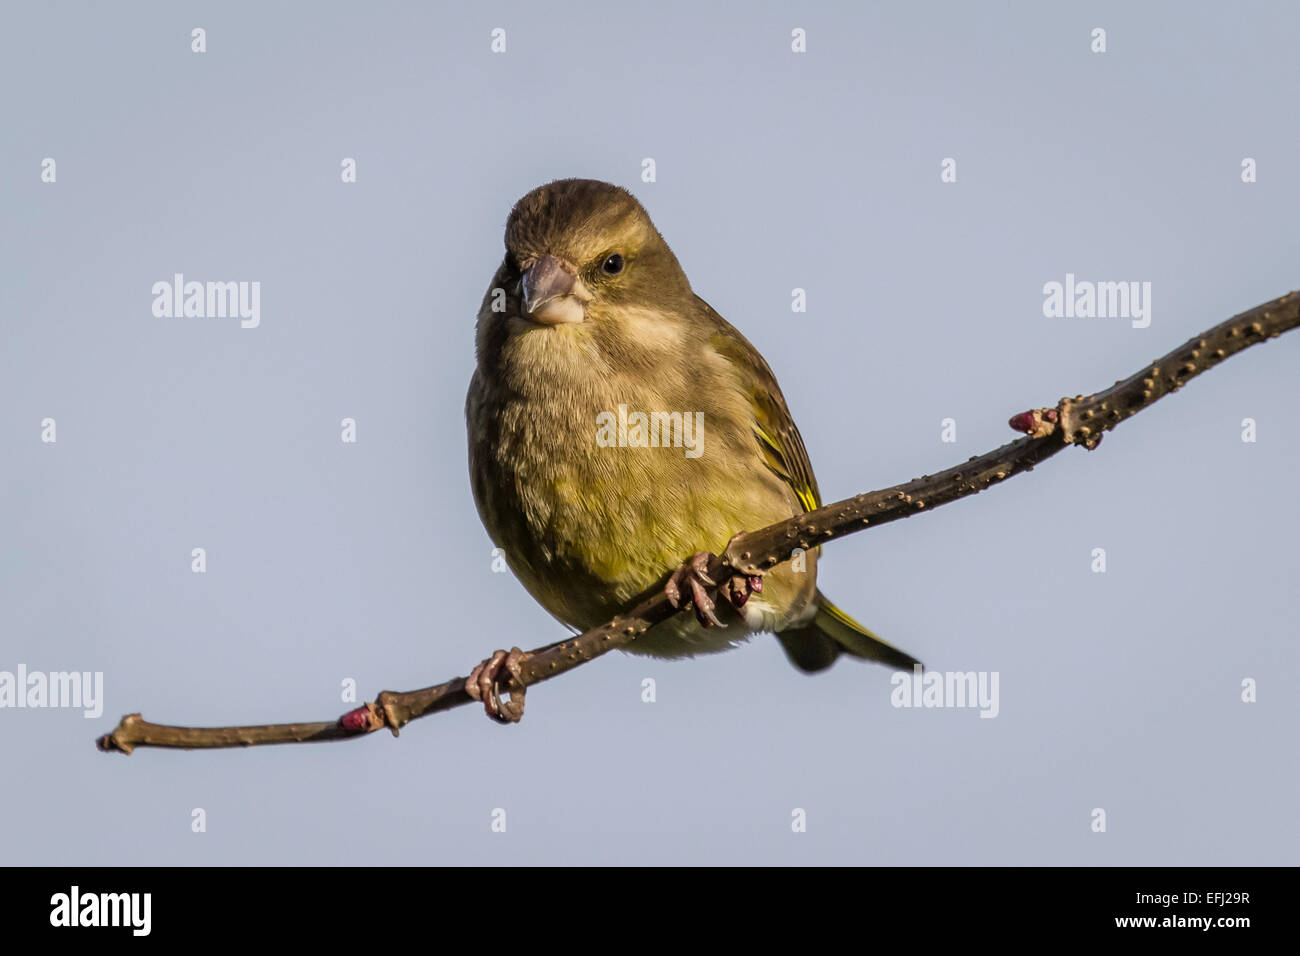 Portrait of a female Greenfinch, Carduelis chloris, perched on a branch against a clear blue sky Stock Photo